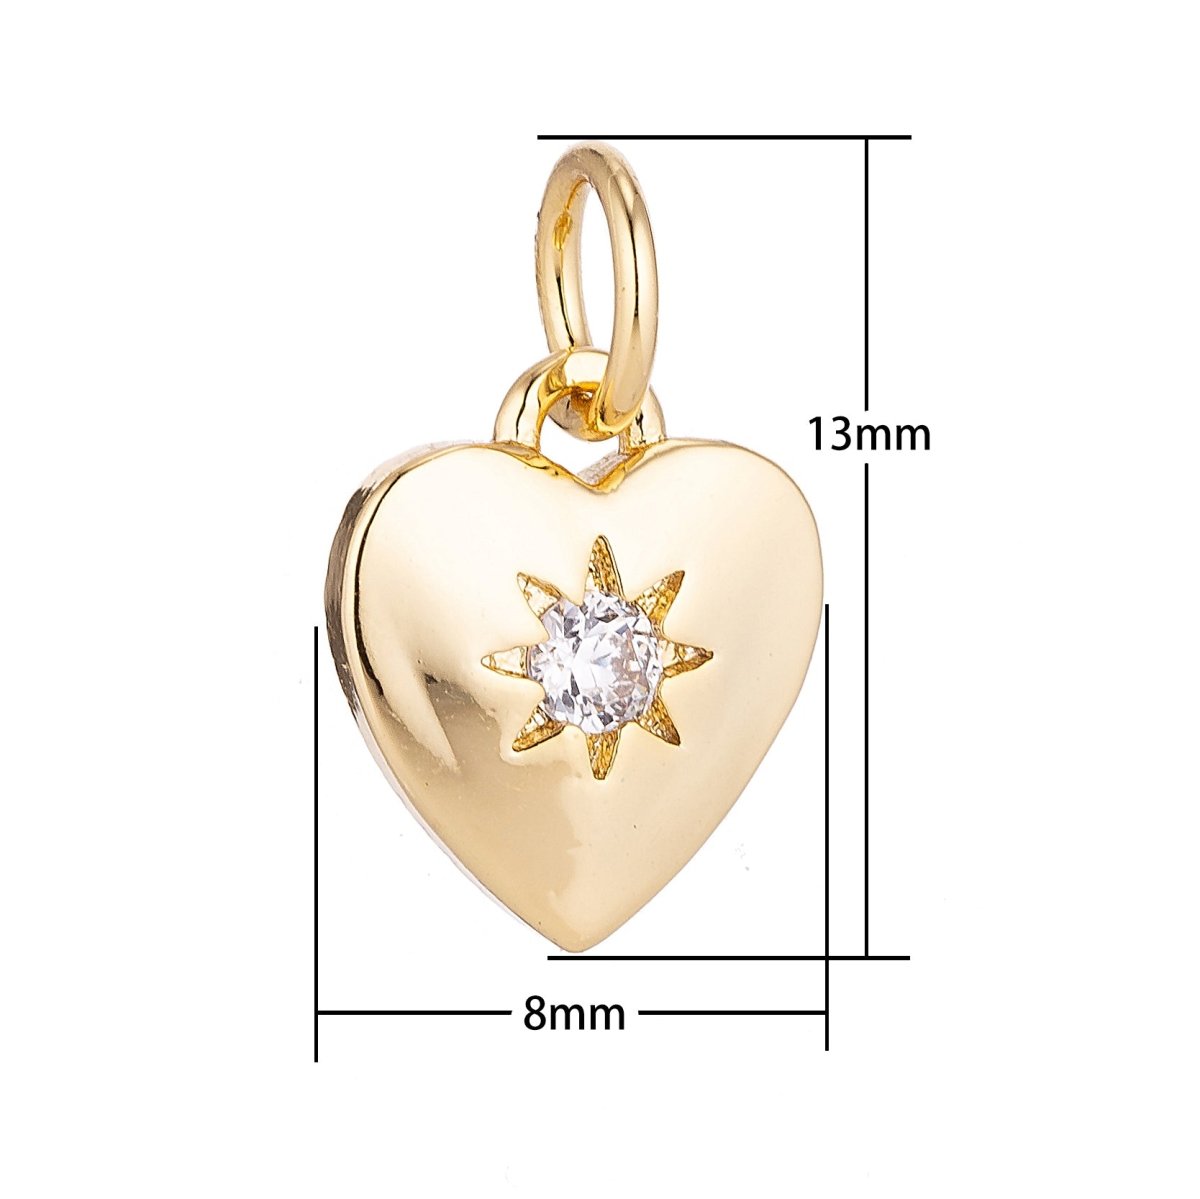 24k Gold Filled Heart of Gold, Star, White Gold Cubic Zirconia Charm Pendant C-047 W-175 - DLUXCA